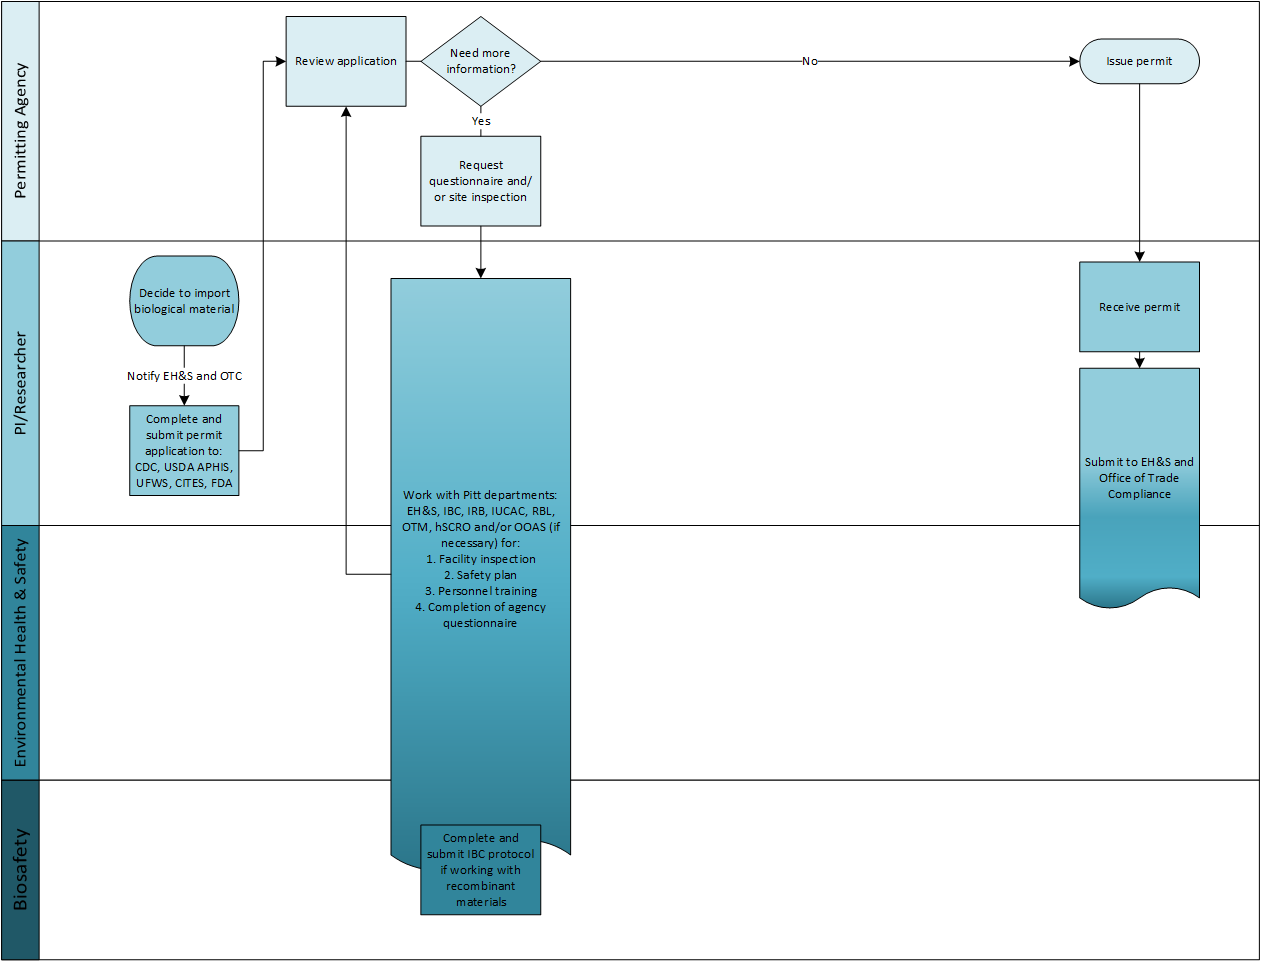 Flowchart outlining the process of material transfer agreement approval by the university of government regulating departments